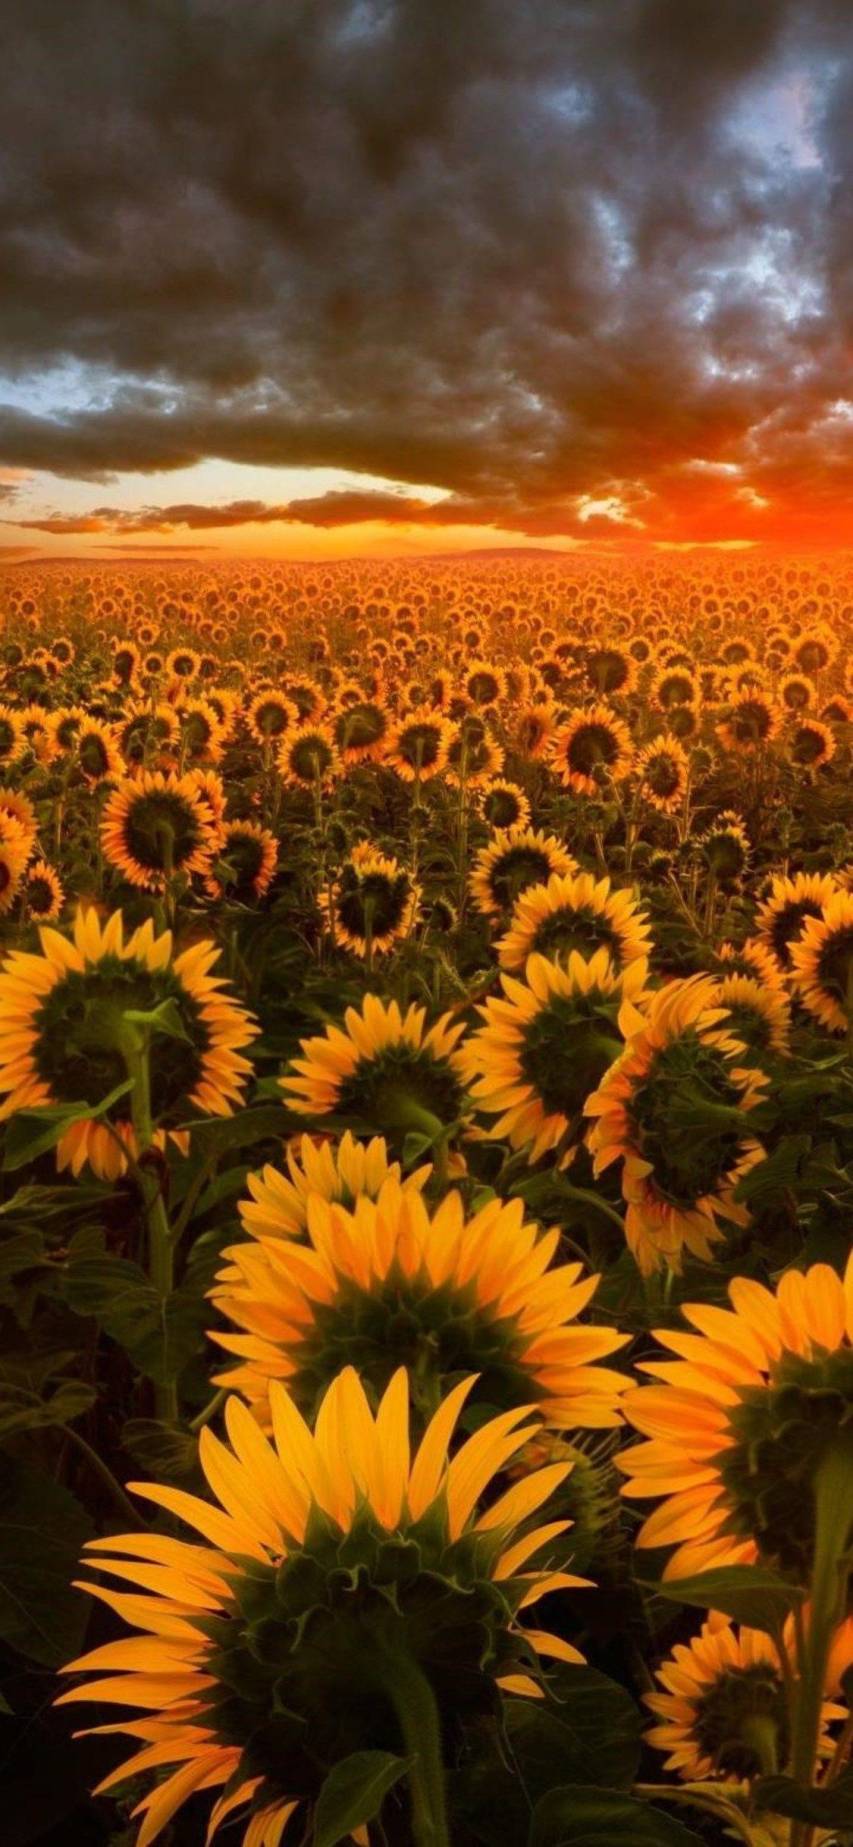 Cool Aesthetic Sunflower Wallpapers and Background for iPhone